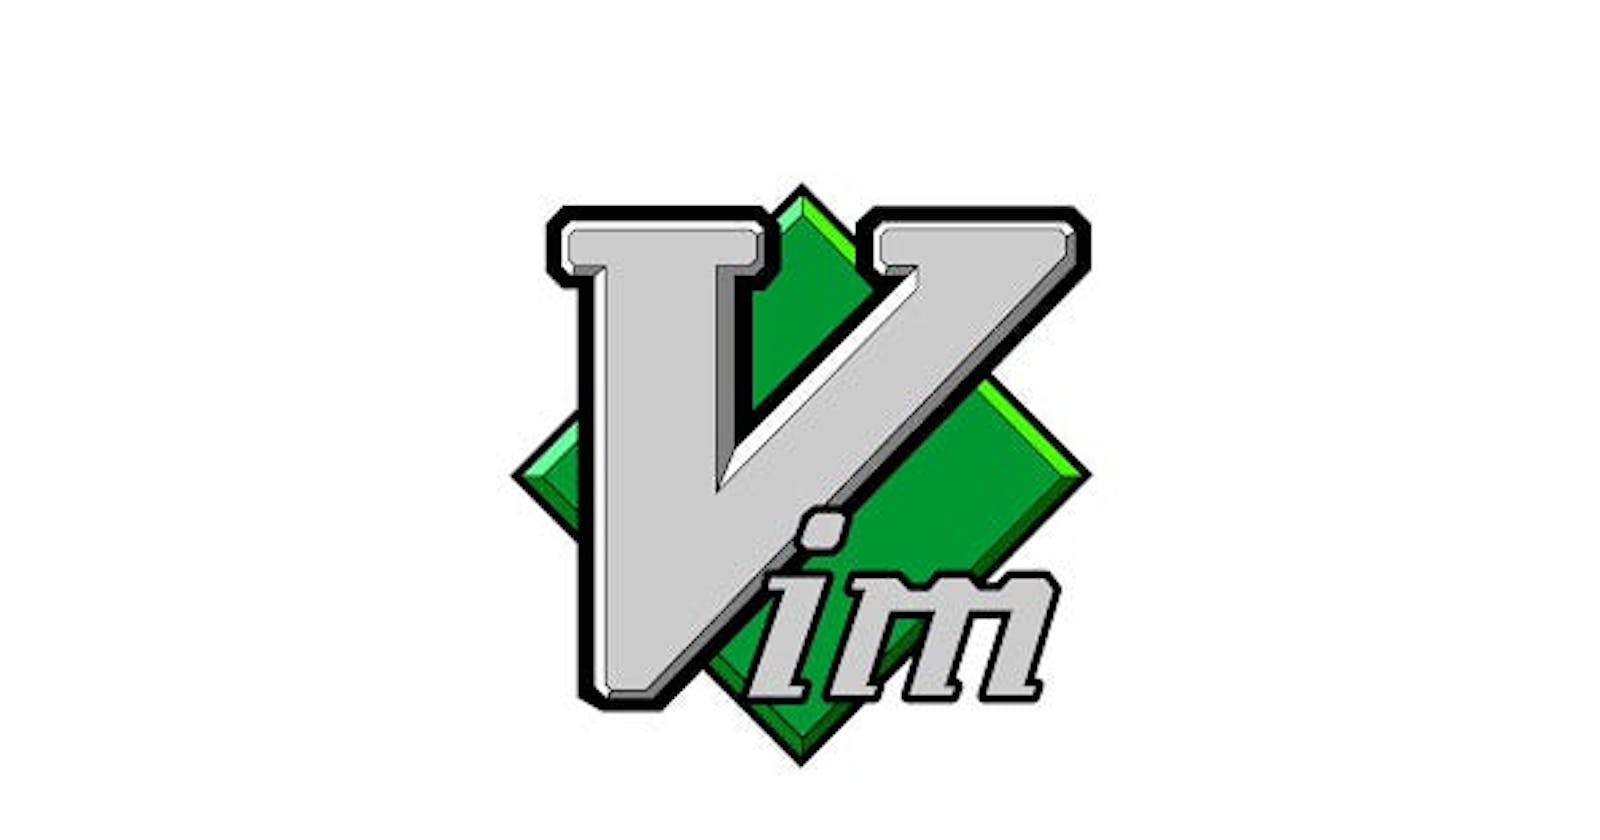 vim commands every engineer should know